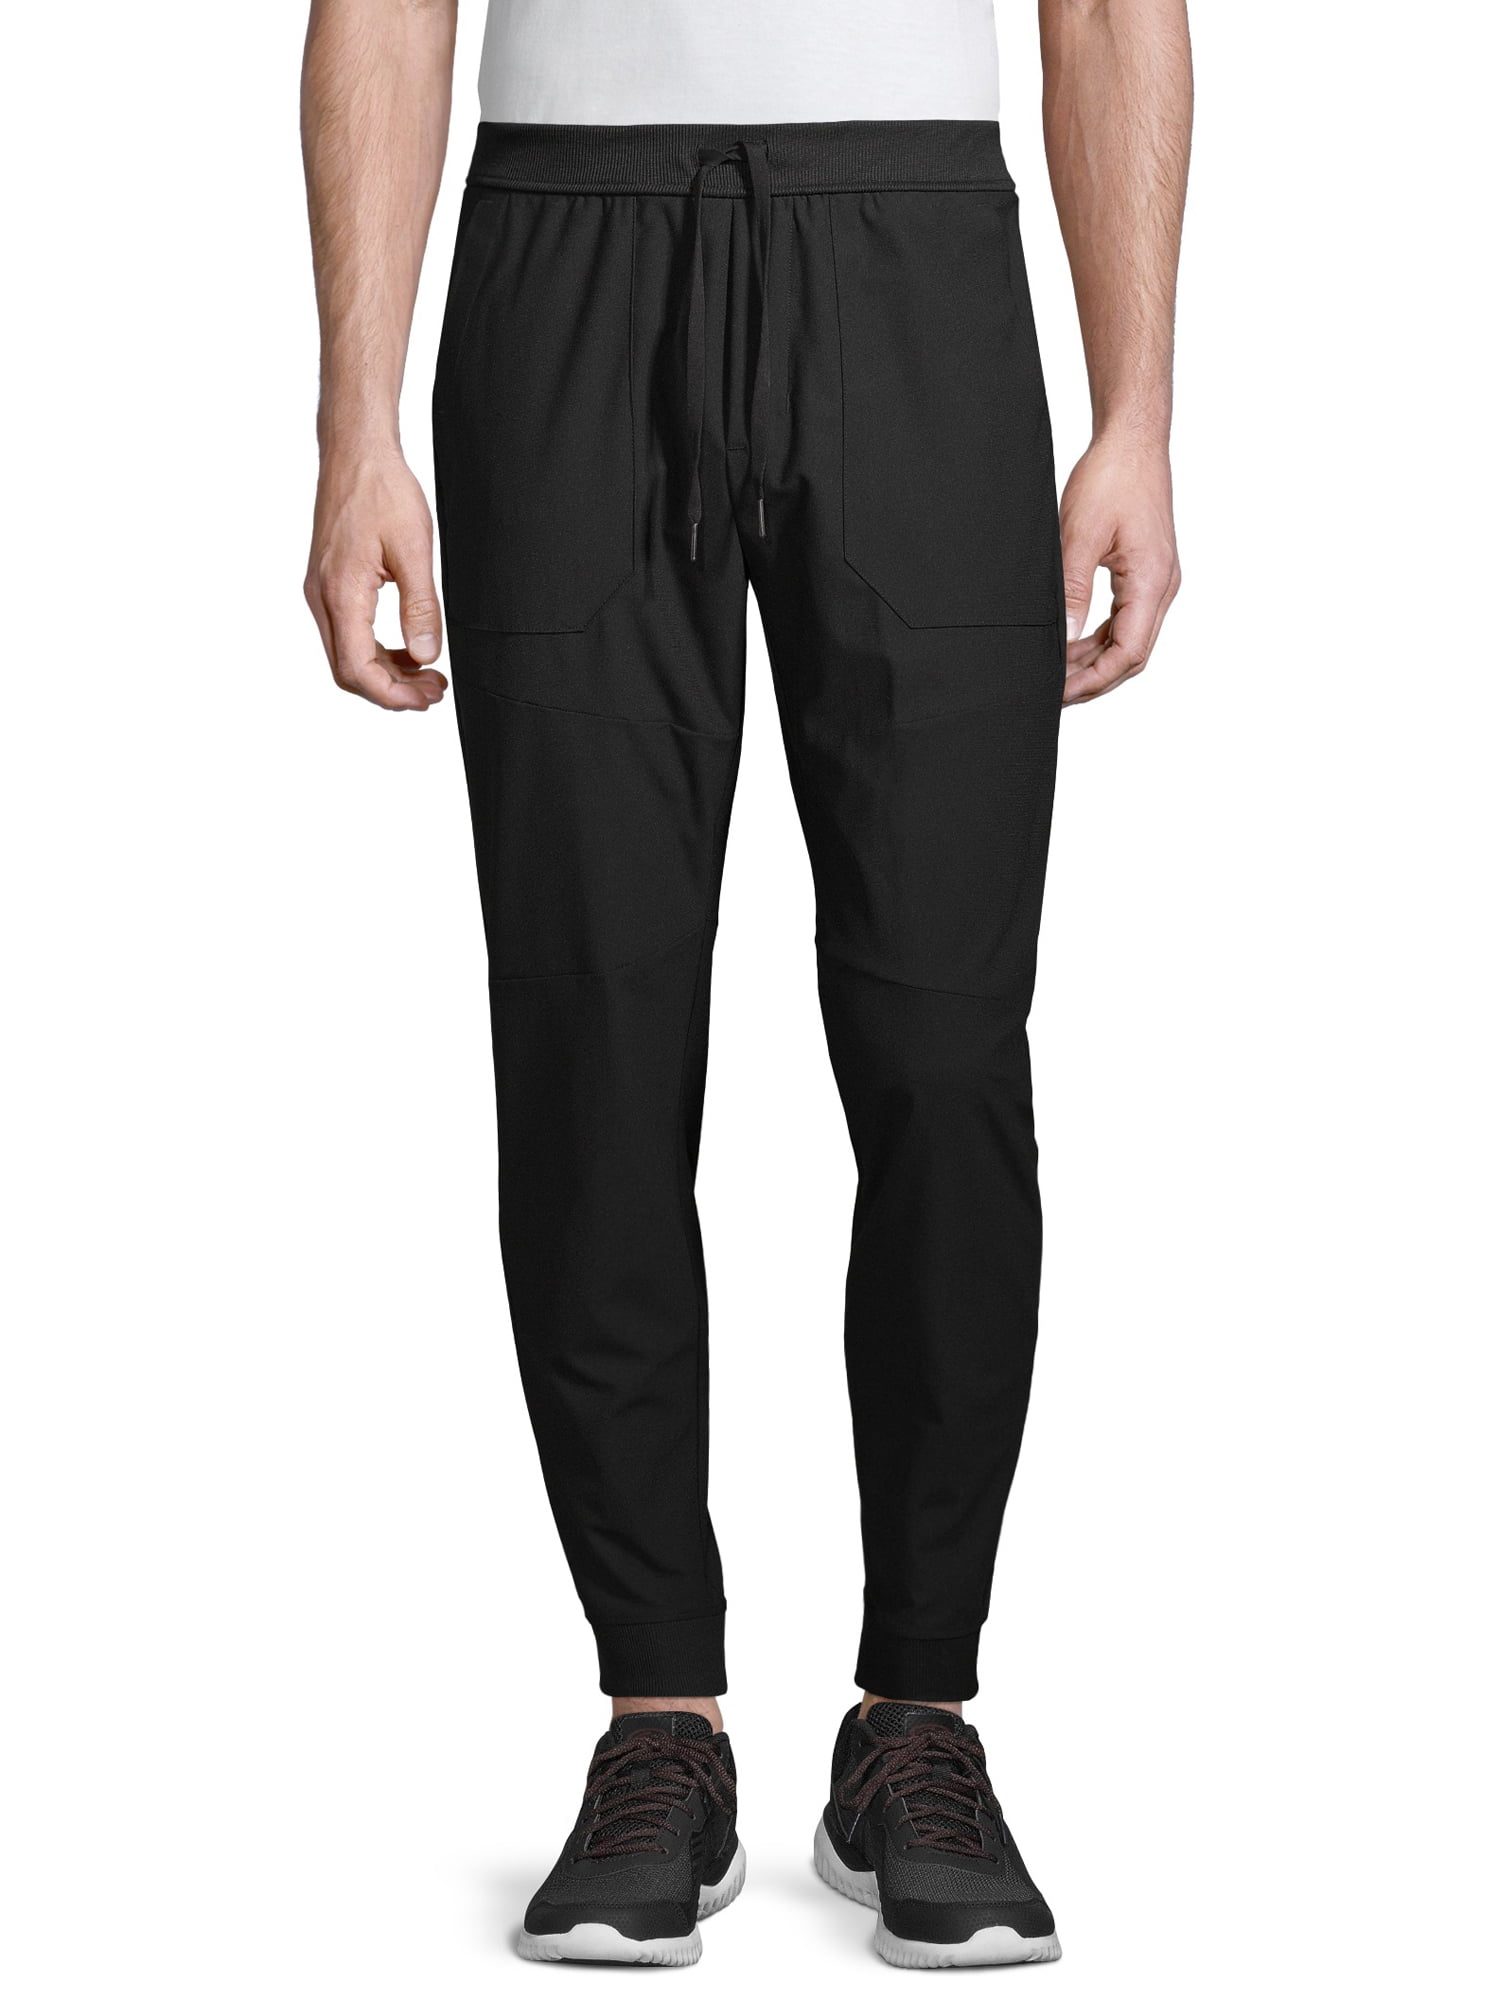 Russell - Russell Men's and Big Men's Woven Performance Joggers, up to ...